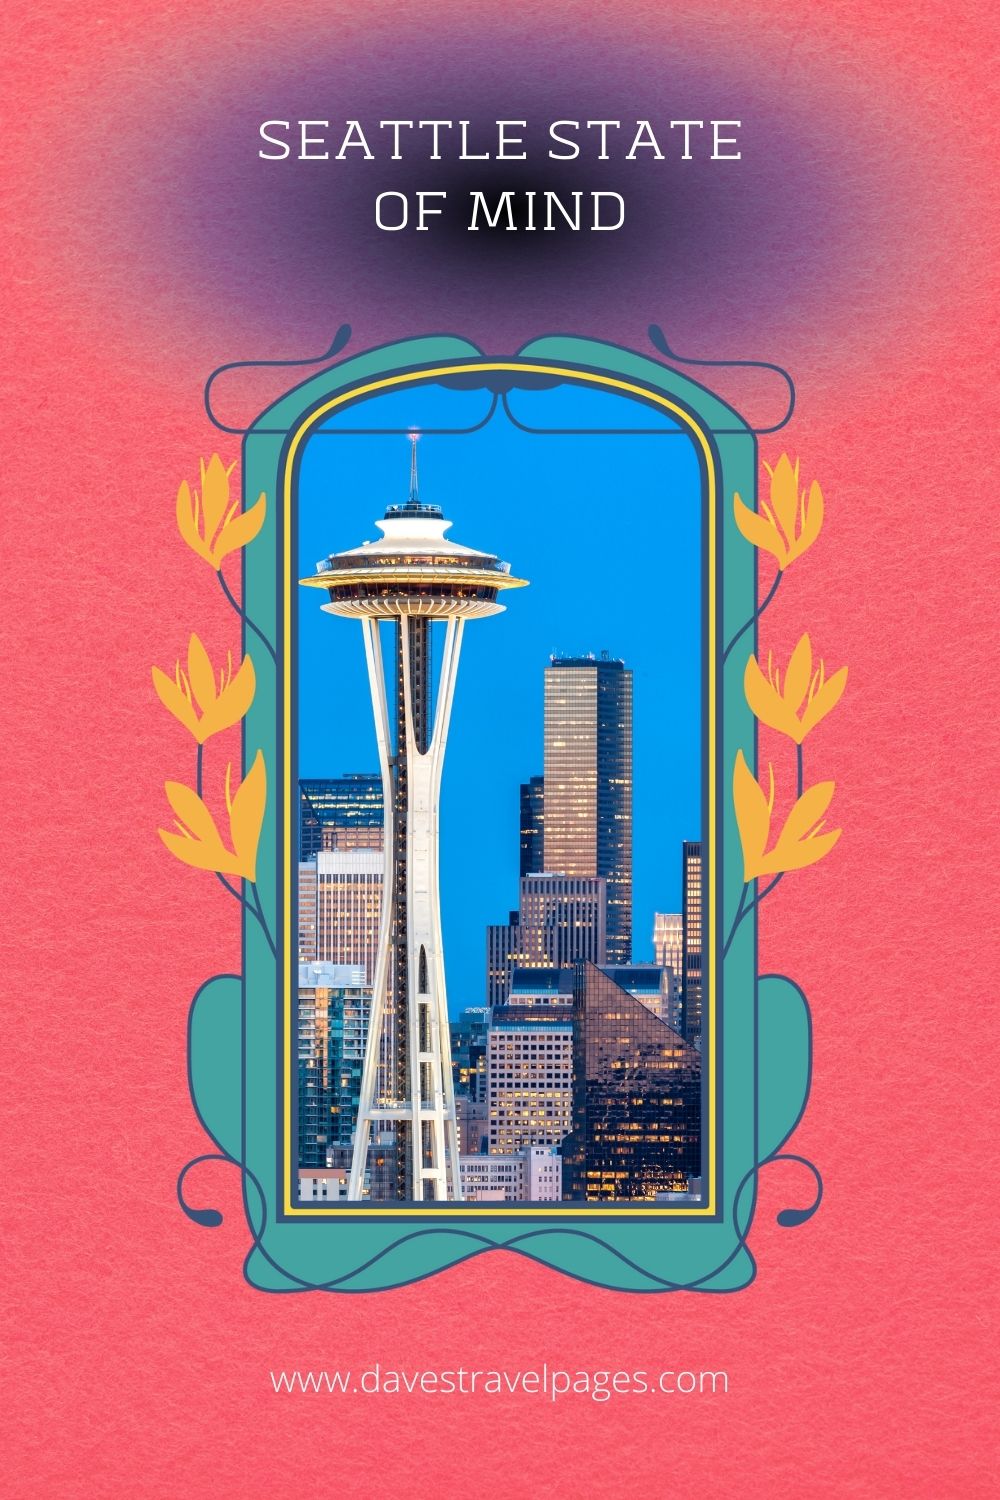 Over 150 Of The Best Captions About Seattle For Instagram